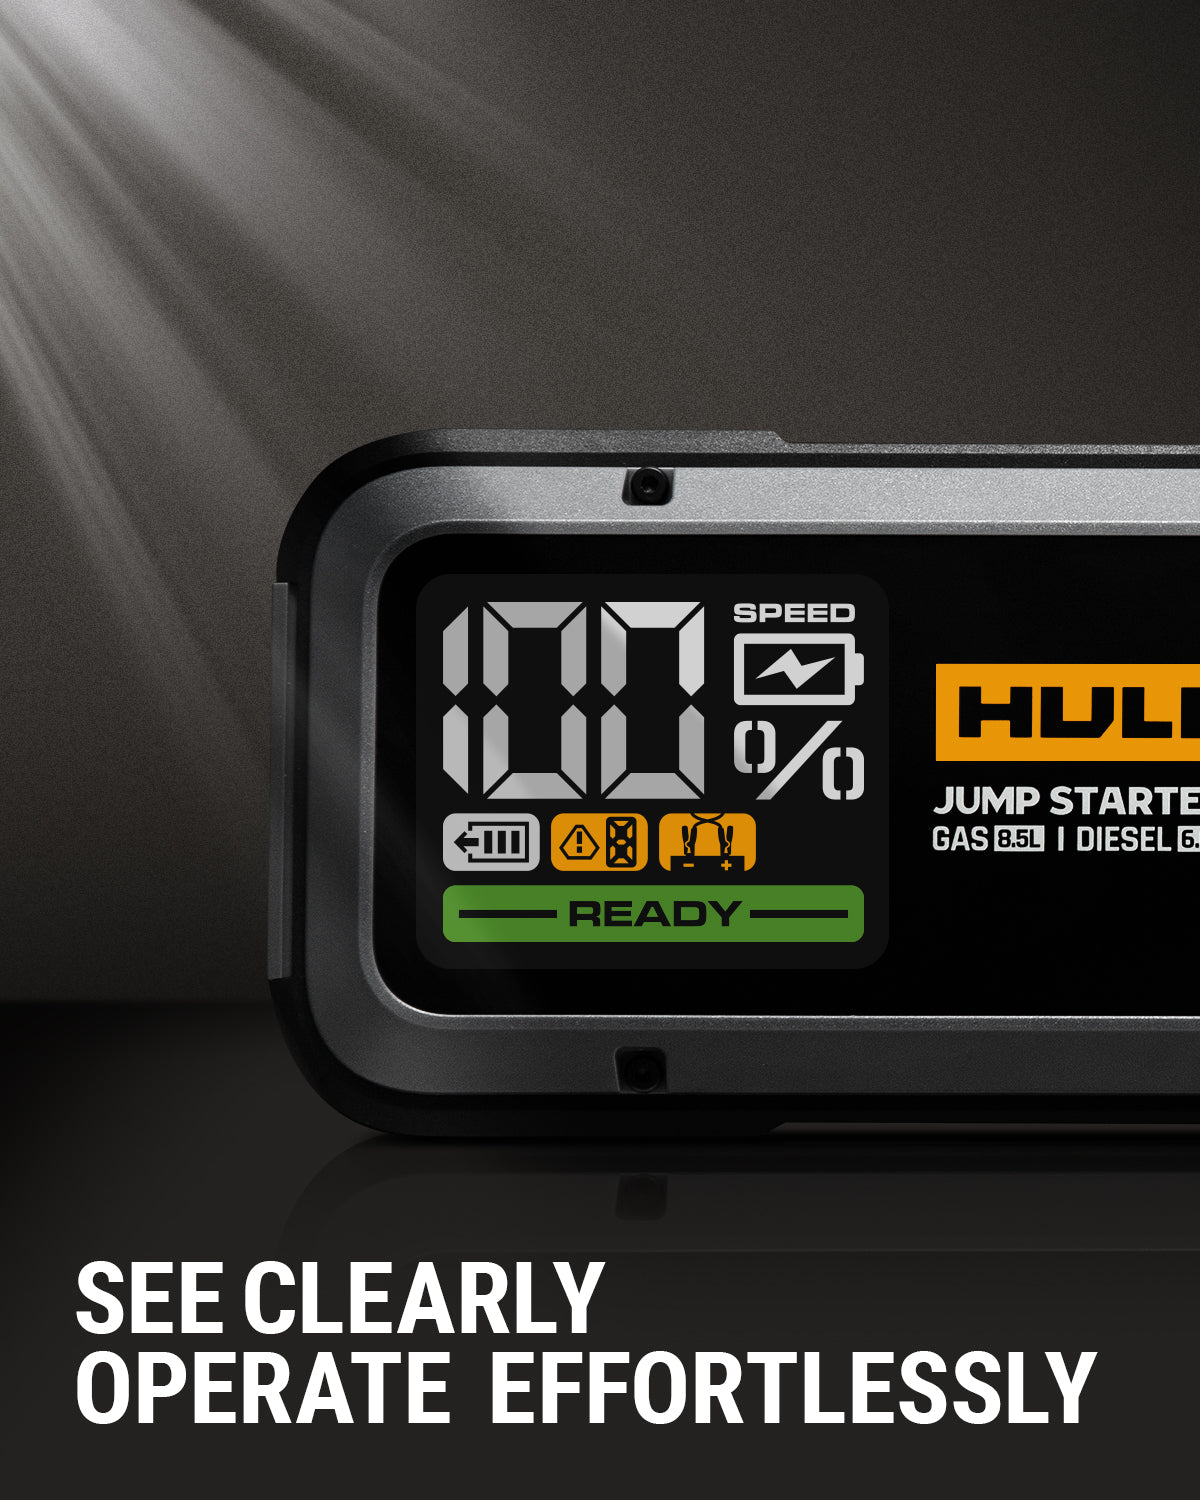 Compare prices for HULKMAN across all European  stores